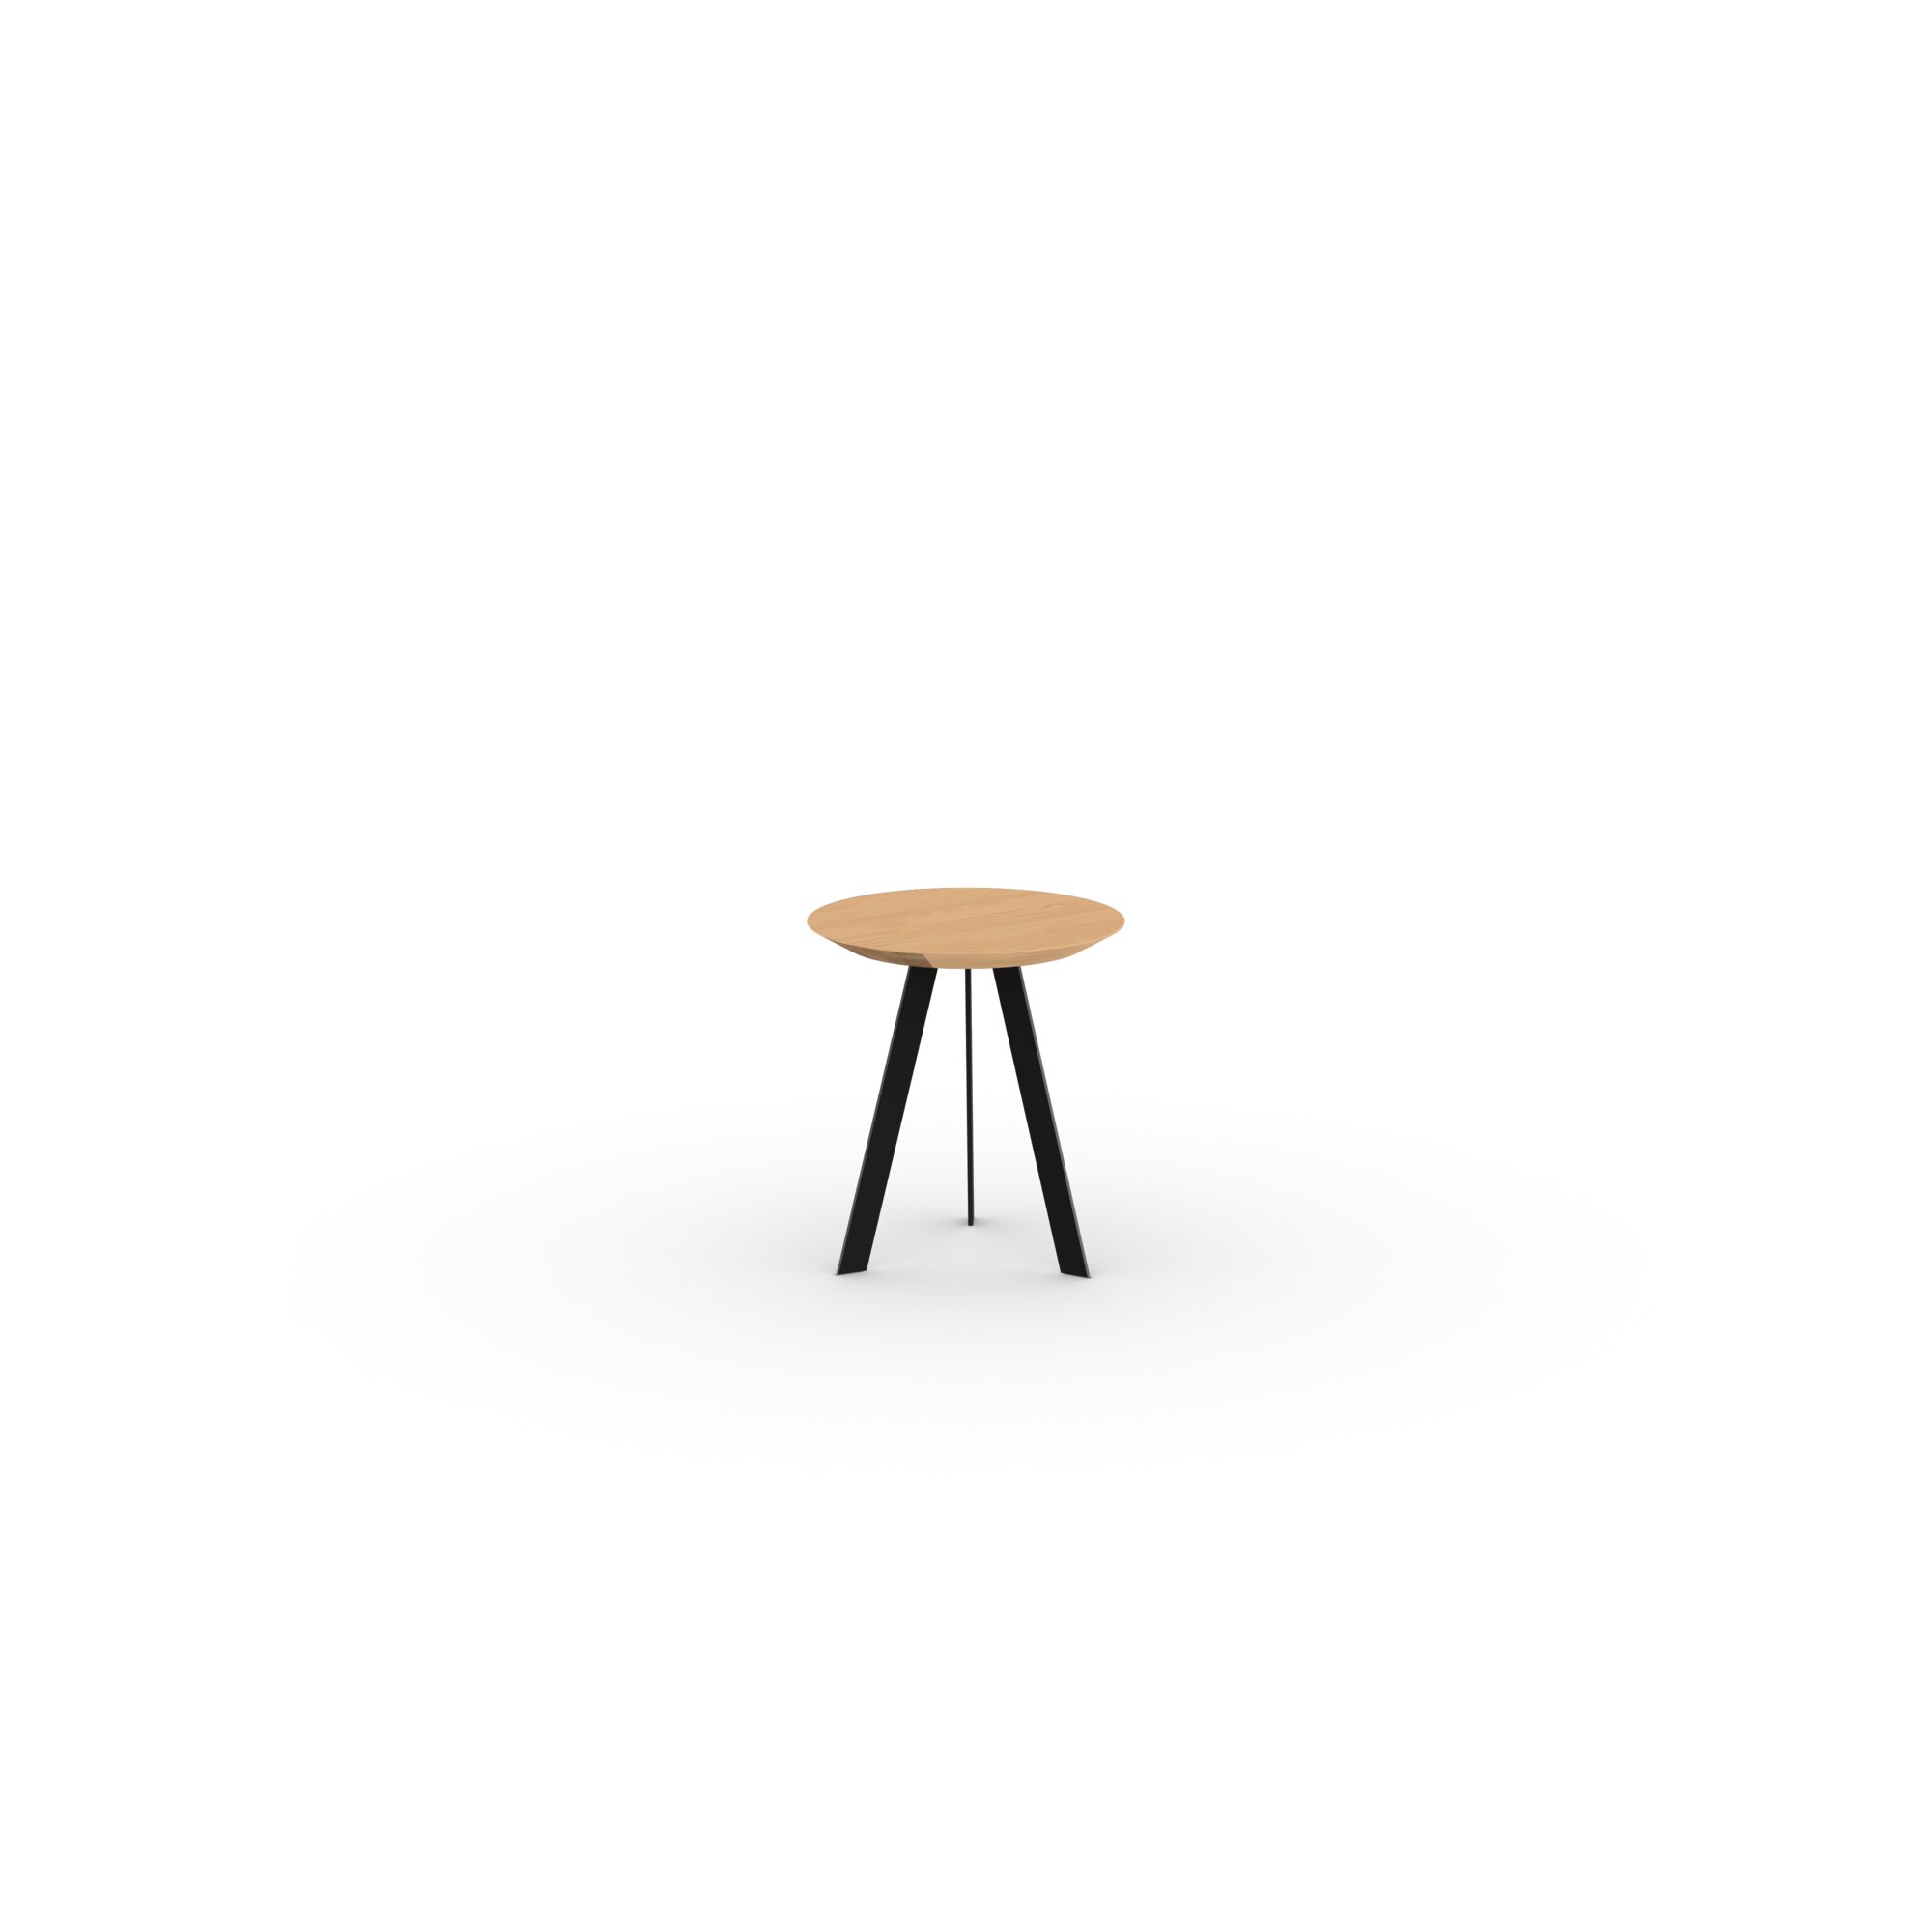 Design Coffee Table | New Co Coffee Table 40 Round Black | Oak hardwax oil natural 3062 | Studio HENK| 